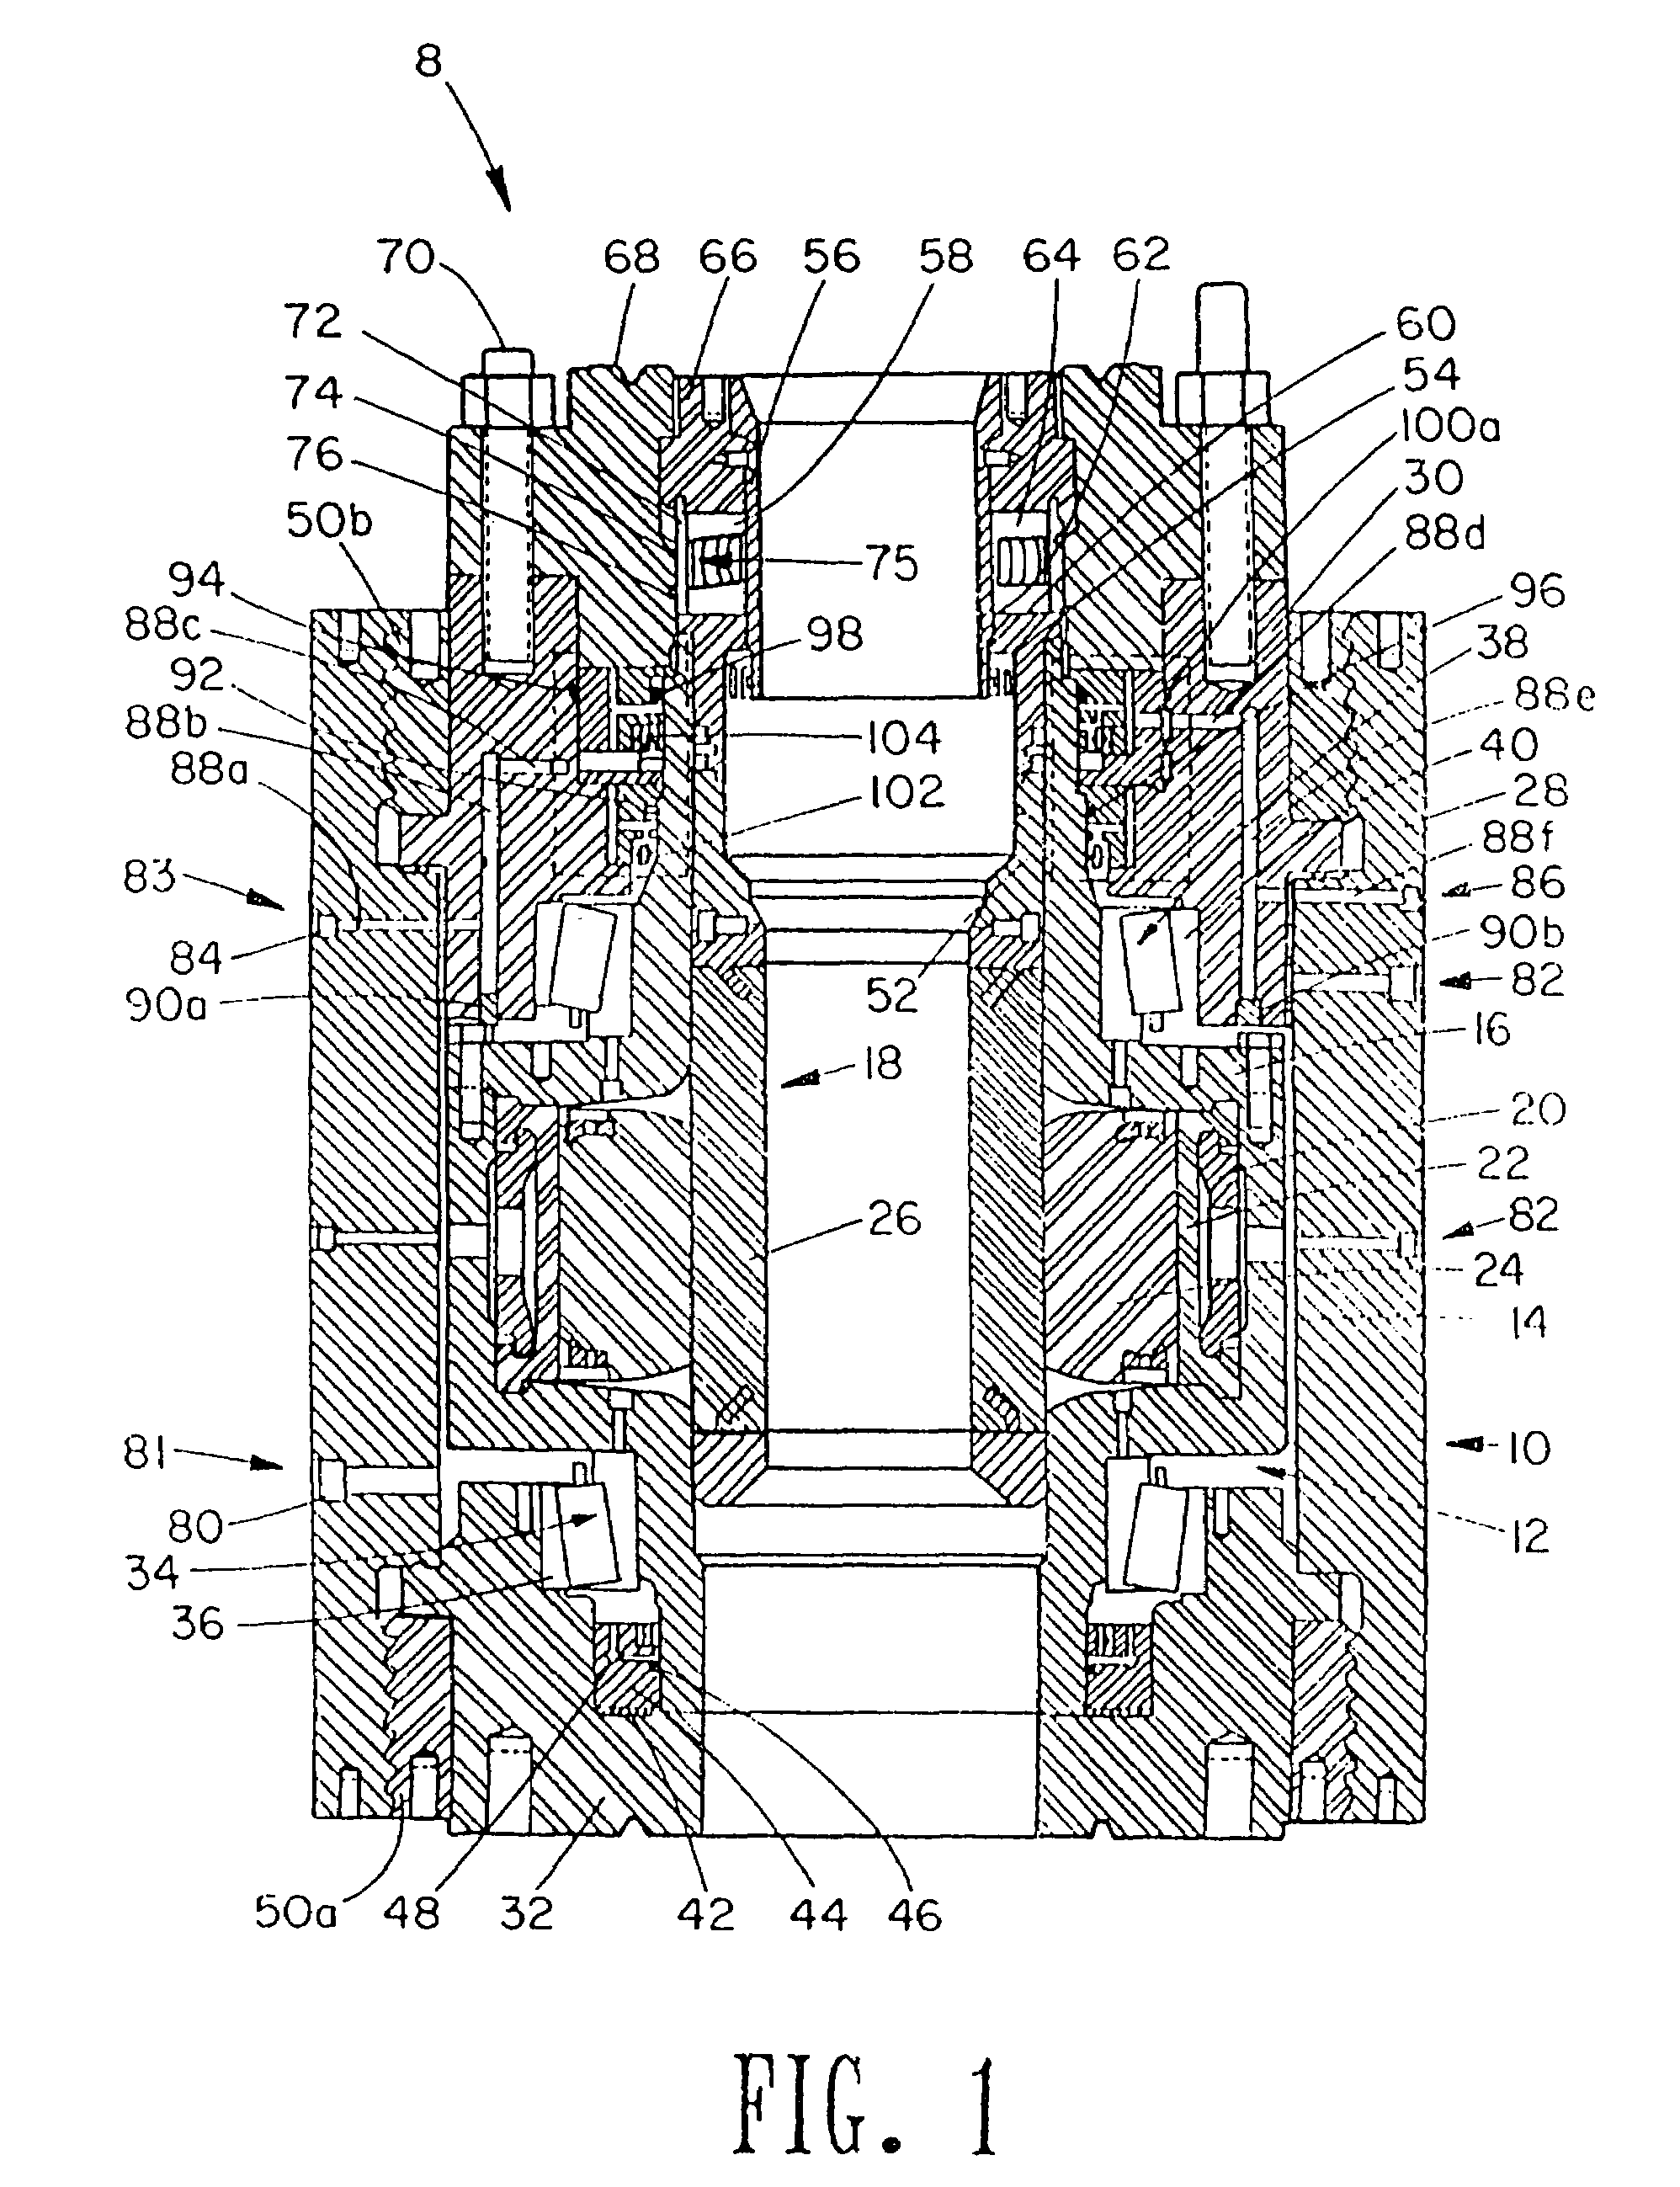 Rotating blowout preventer with independent cooling circuits and thrust bearing